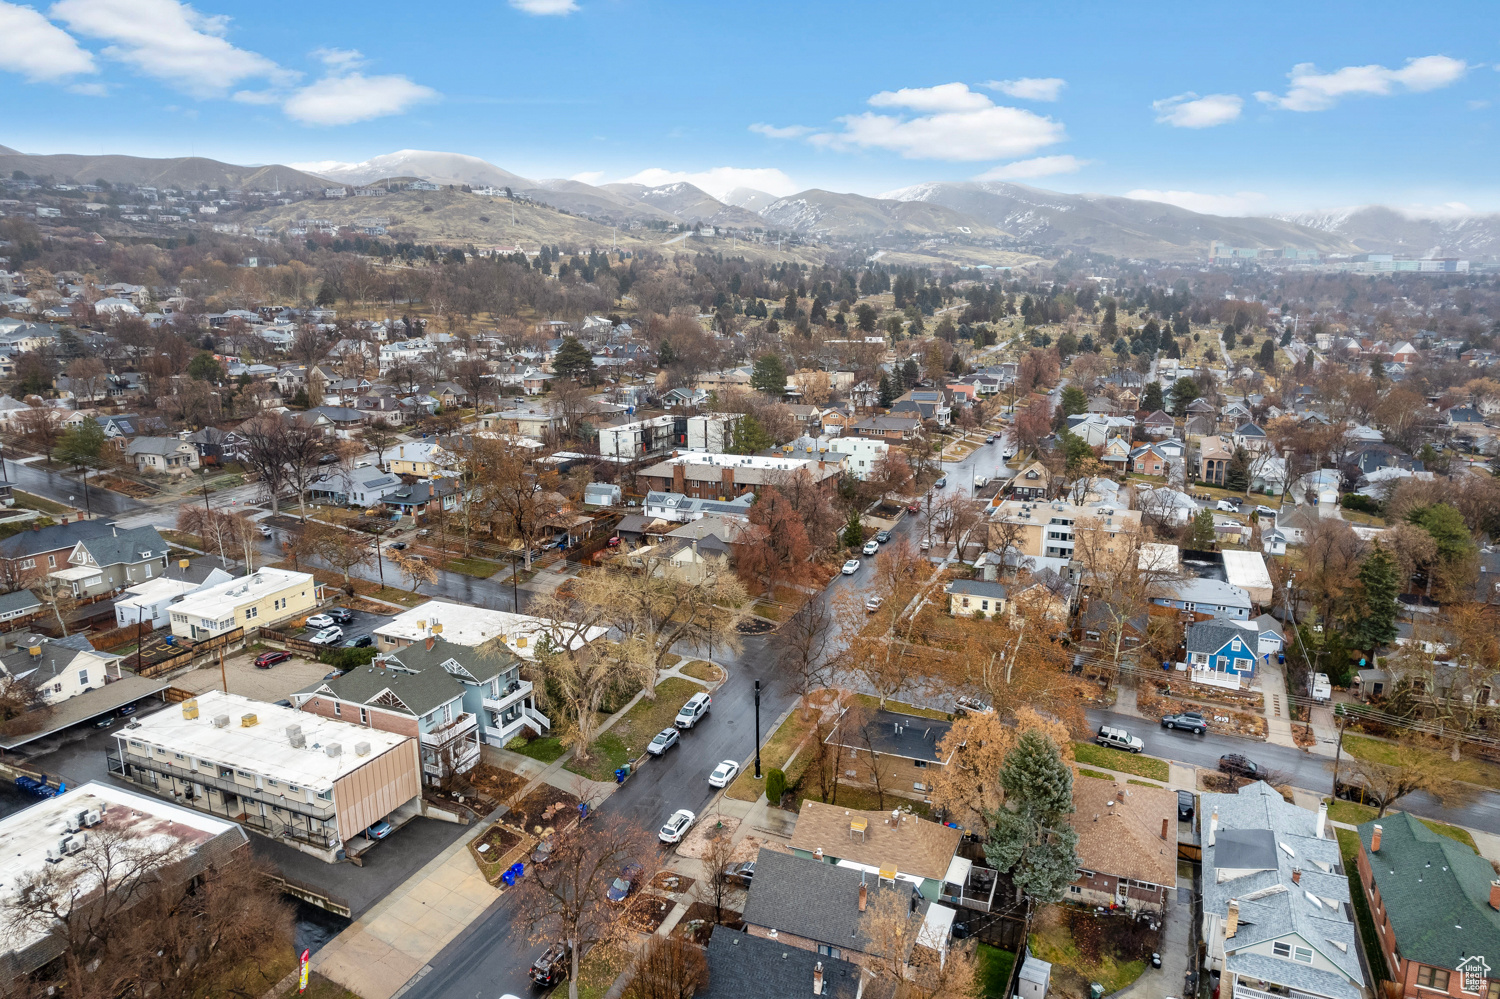 Close to downtown Salt Lake City and close to University of Utah and to the mountains.